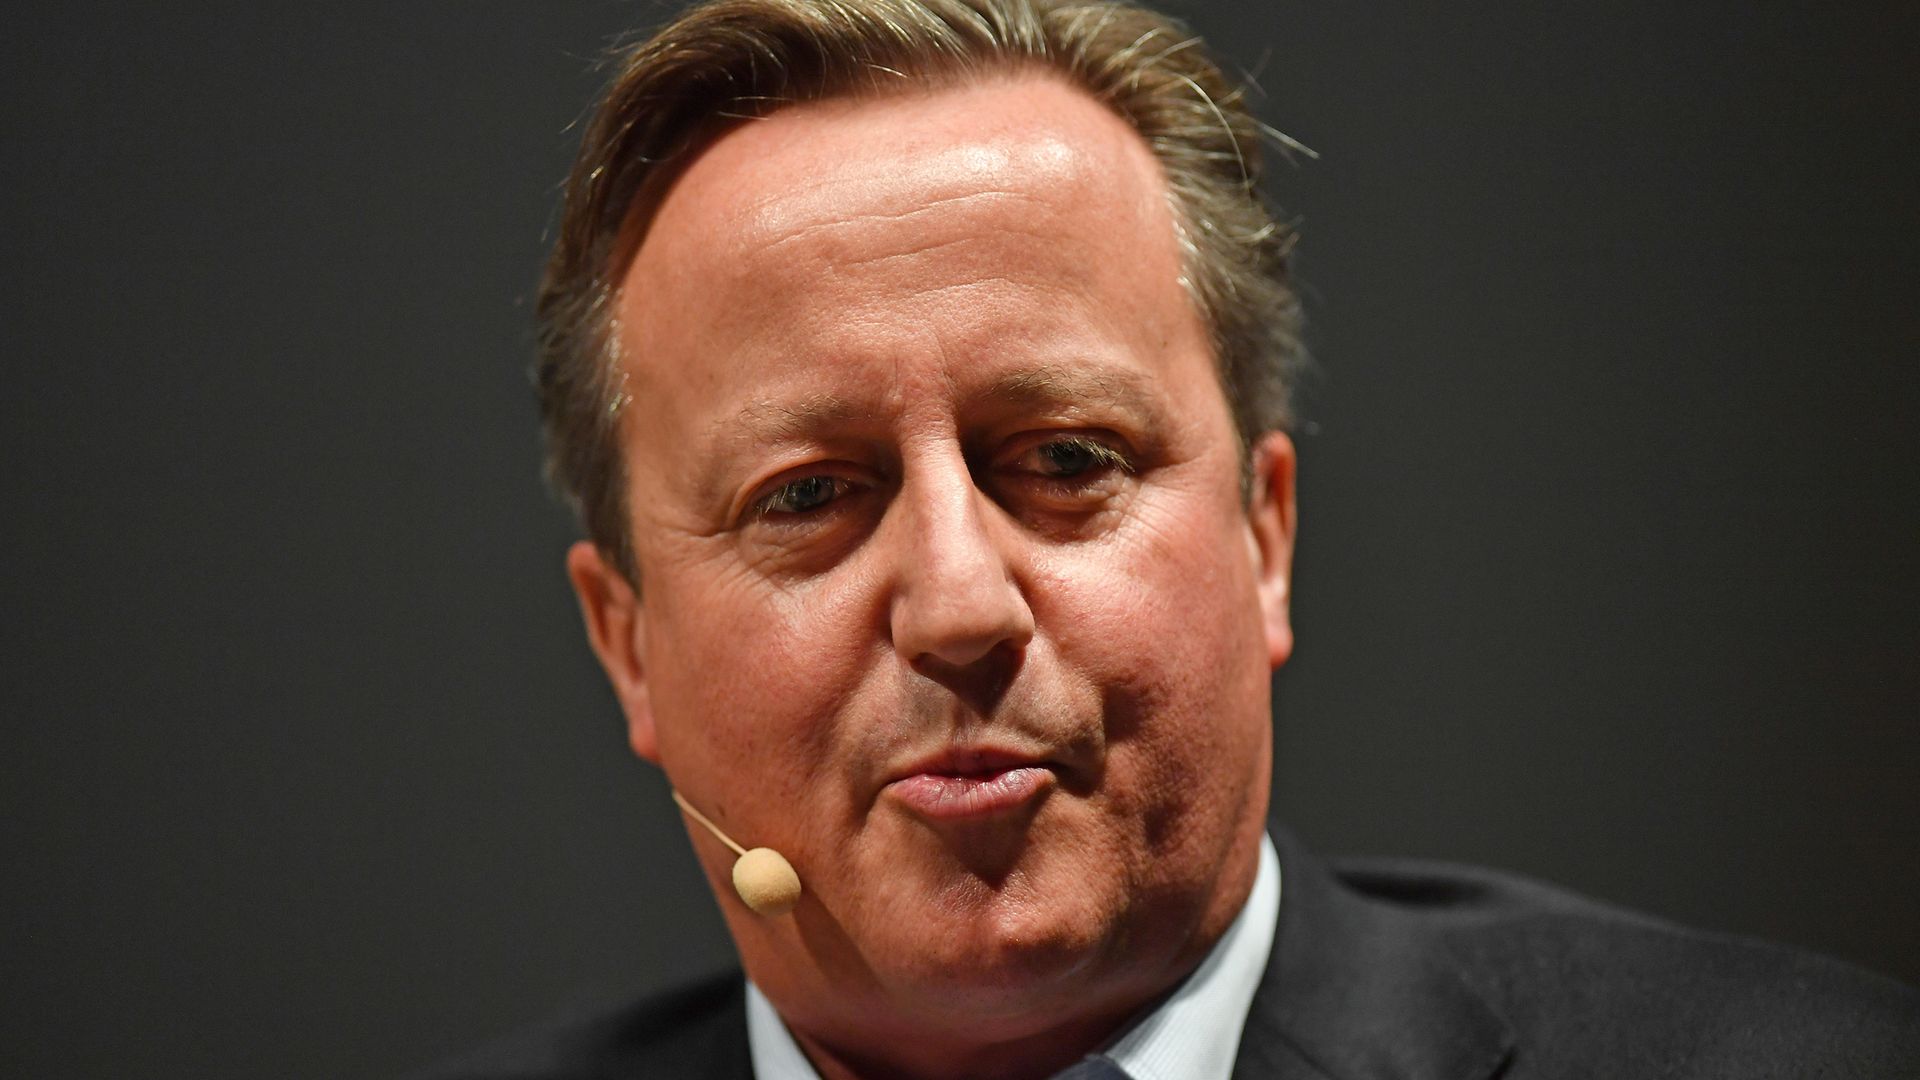 David Cameron (pictured above) and Lex Greensill will be questioned over their involvement in Greensill lobbying scandal by MPs next week - Credit: PA